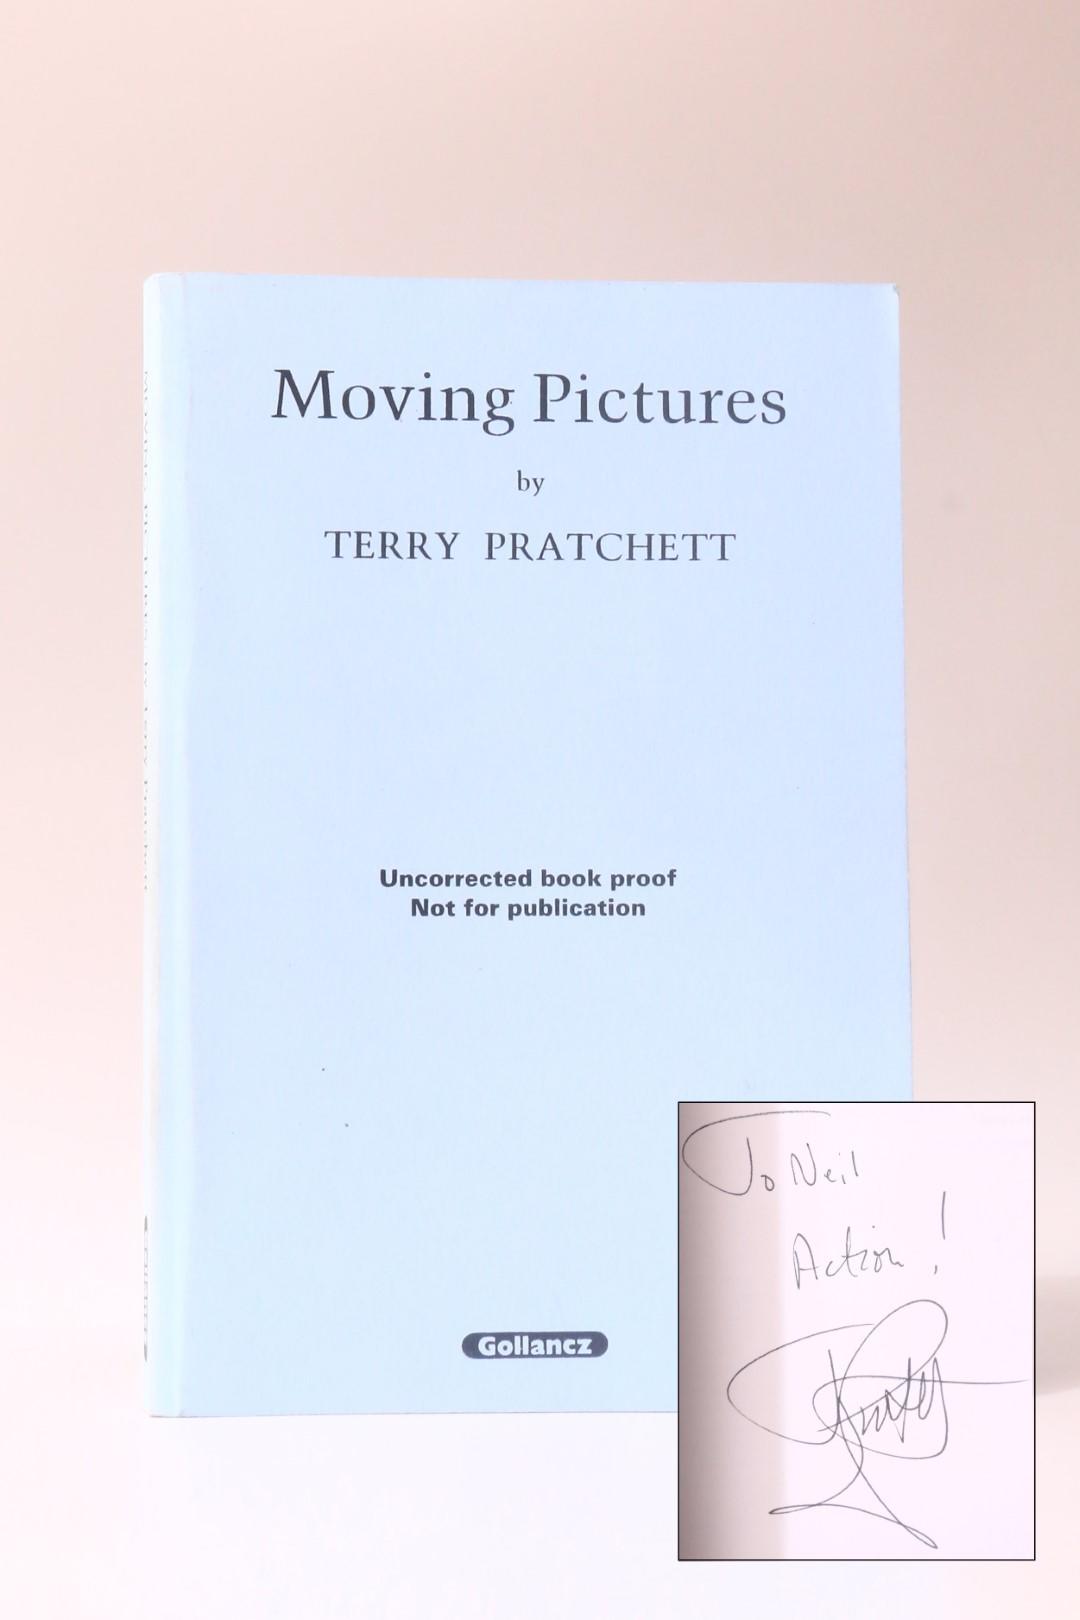 Terry Pratchett - Moving Pictures - Gollancz, 1990, Signed